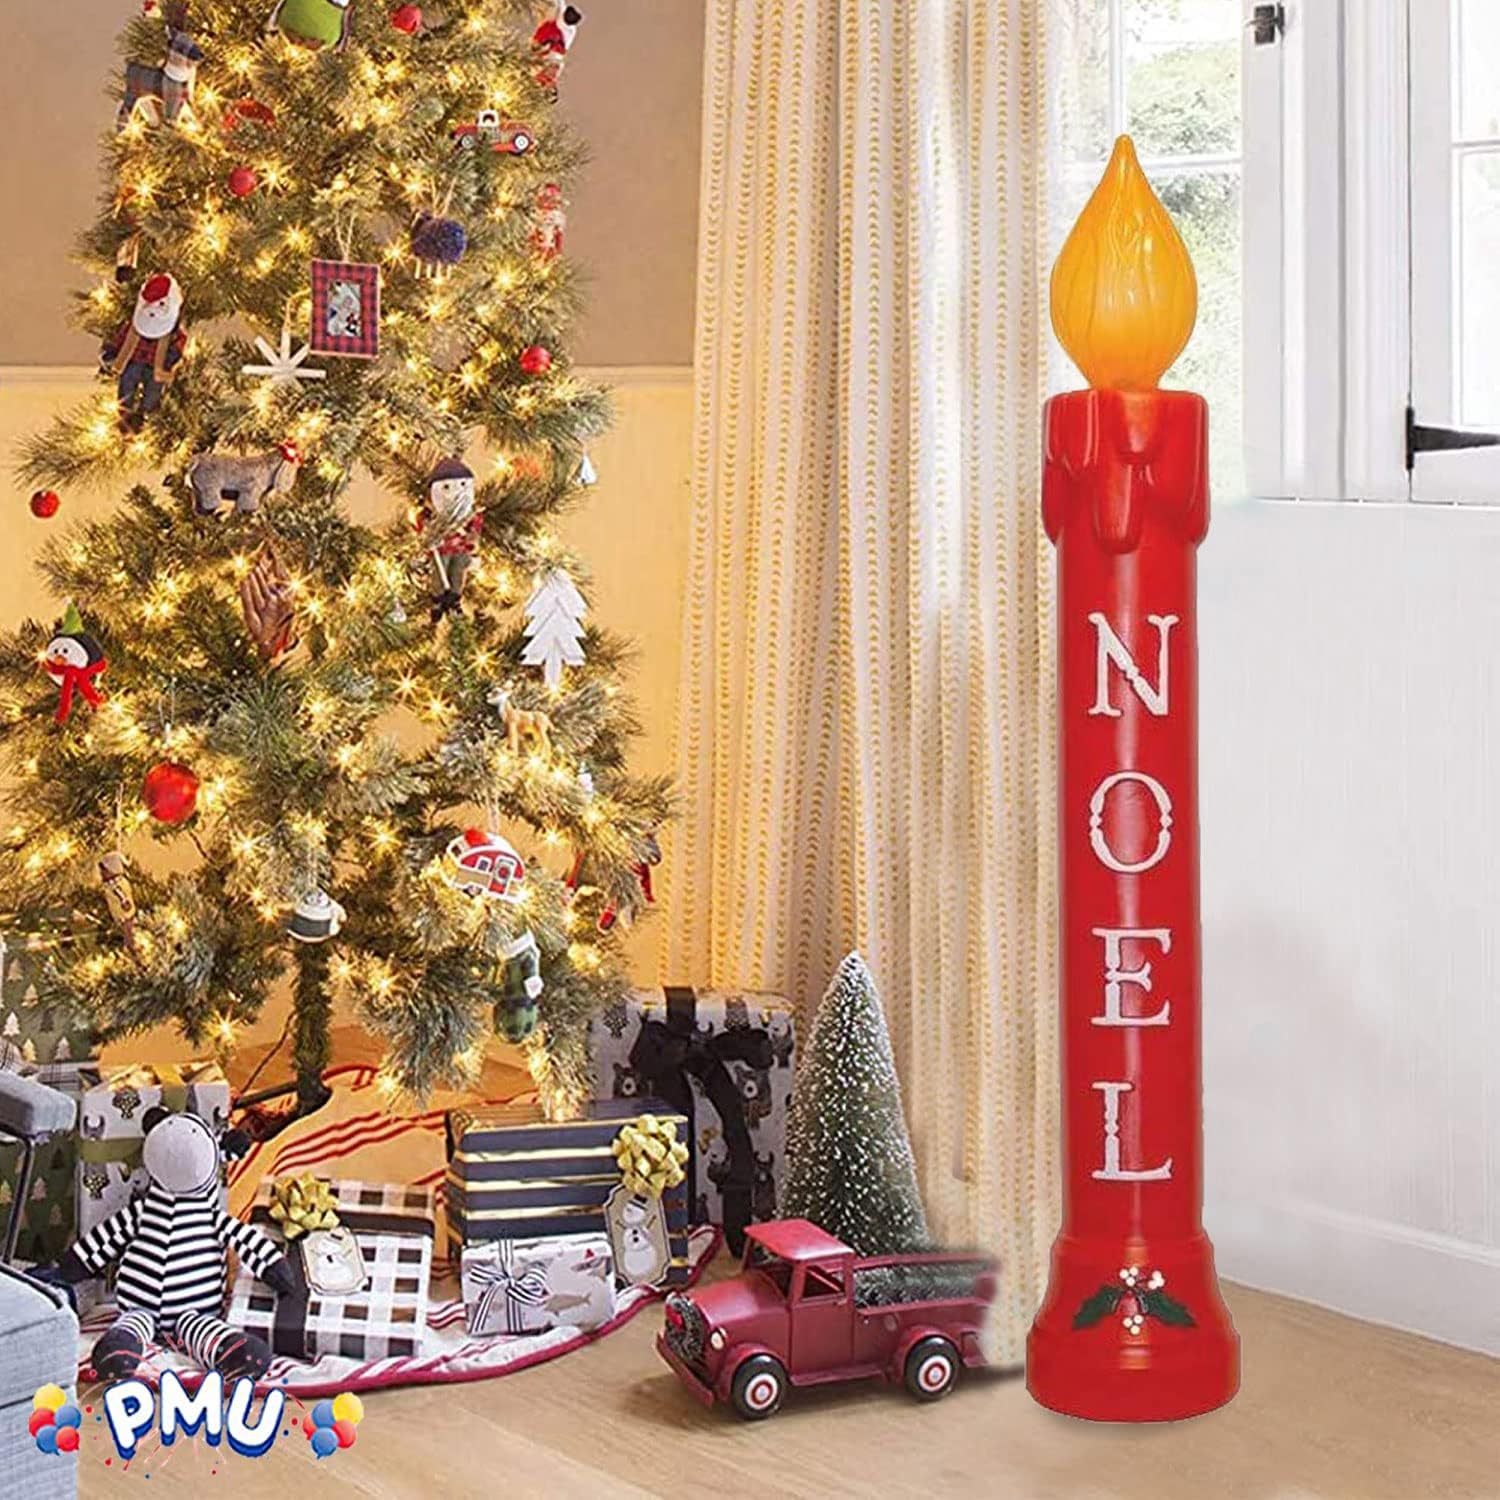  Light-Up Noel Candle